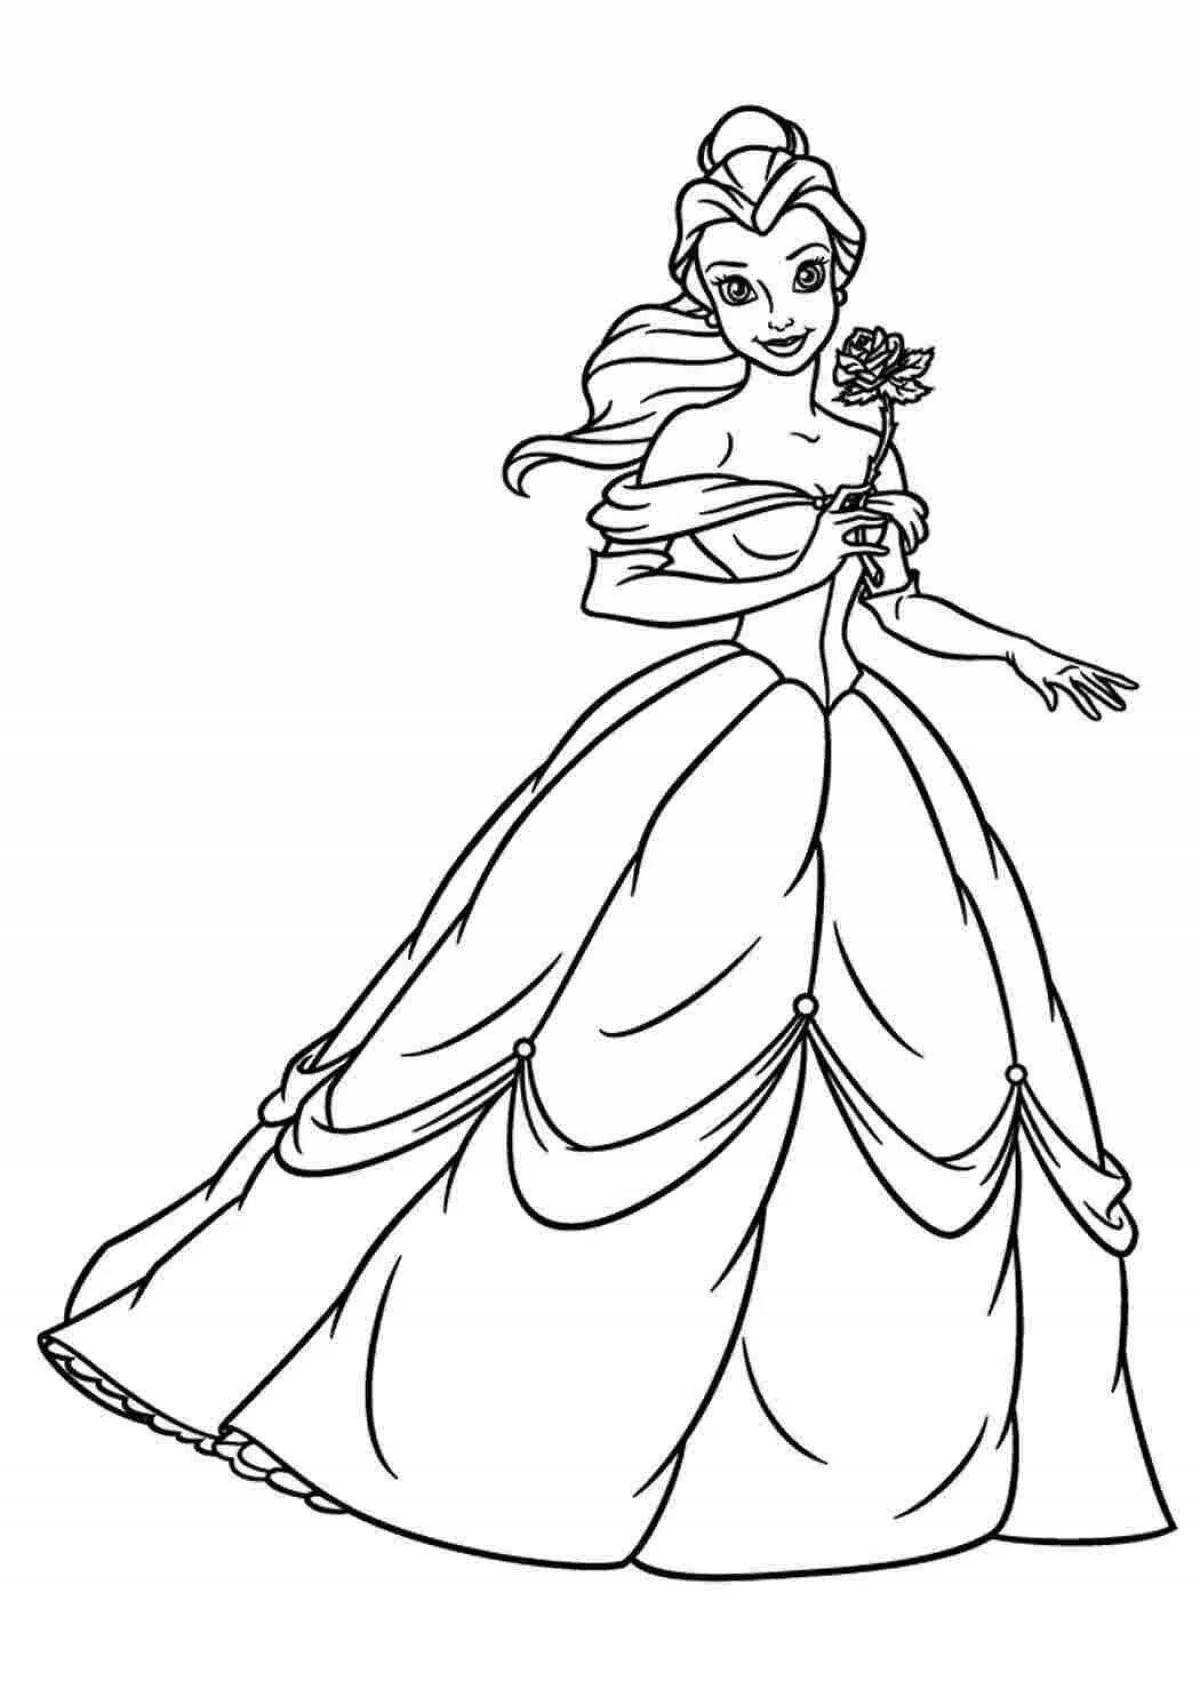 Luxury lingerie coloring page